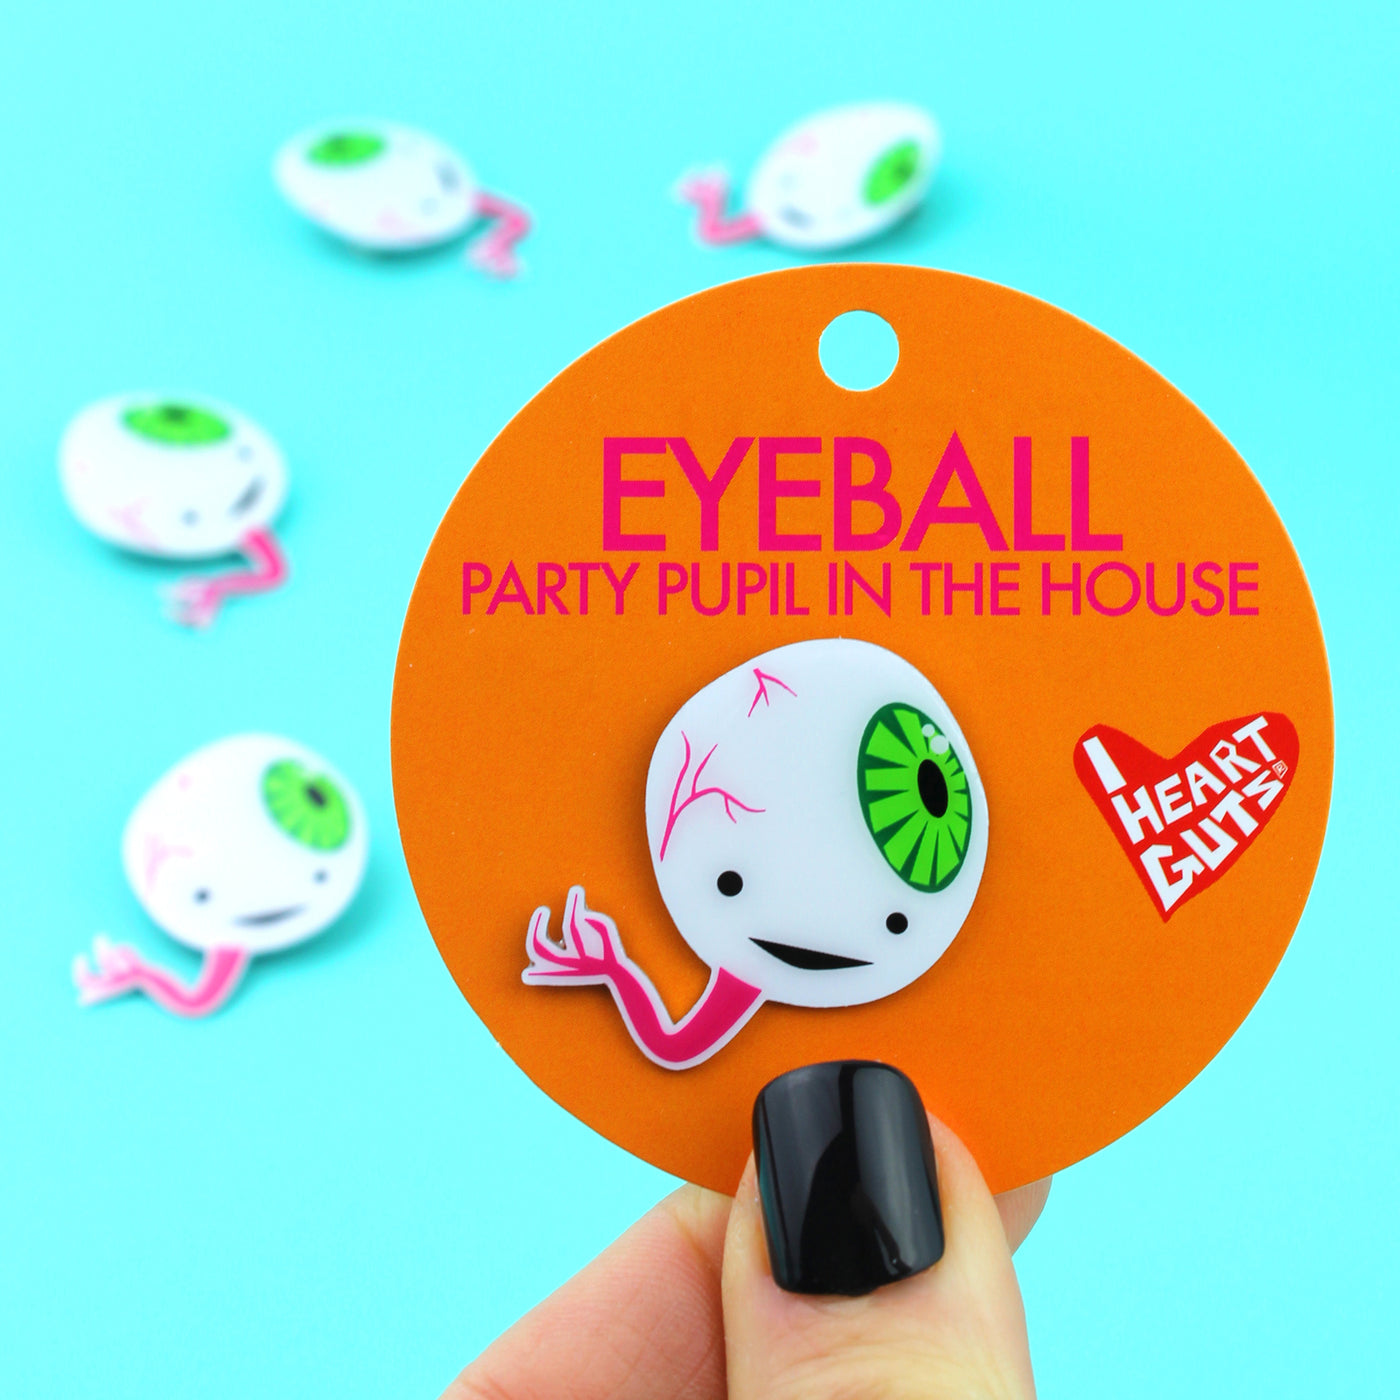 Eyeball Lapel Pin - Party Pupil in the House! - I Heart Guts